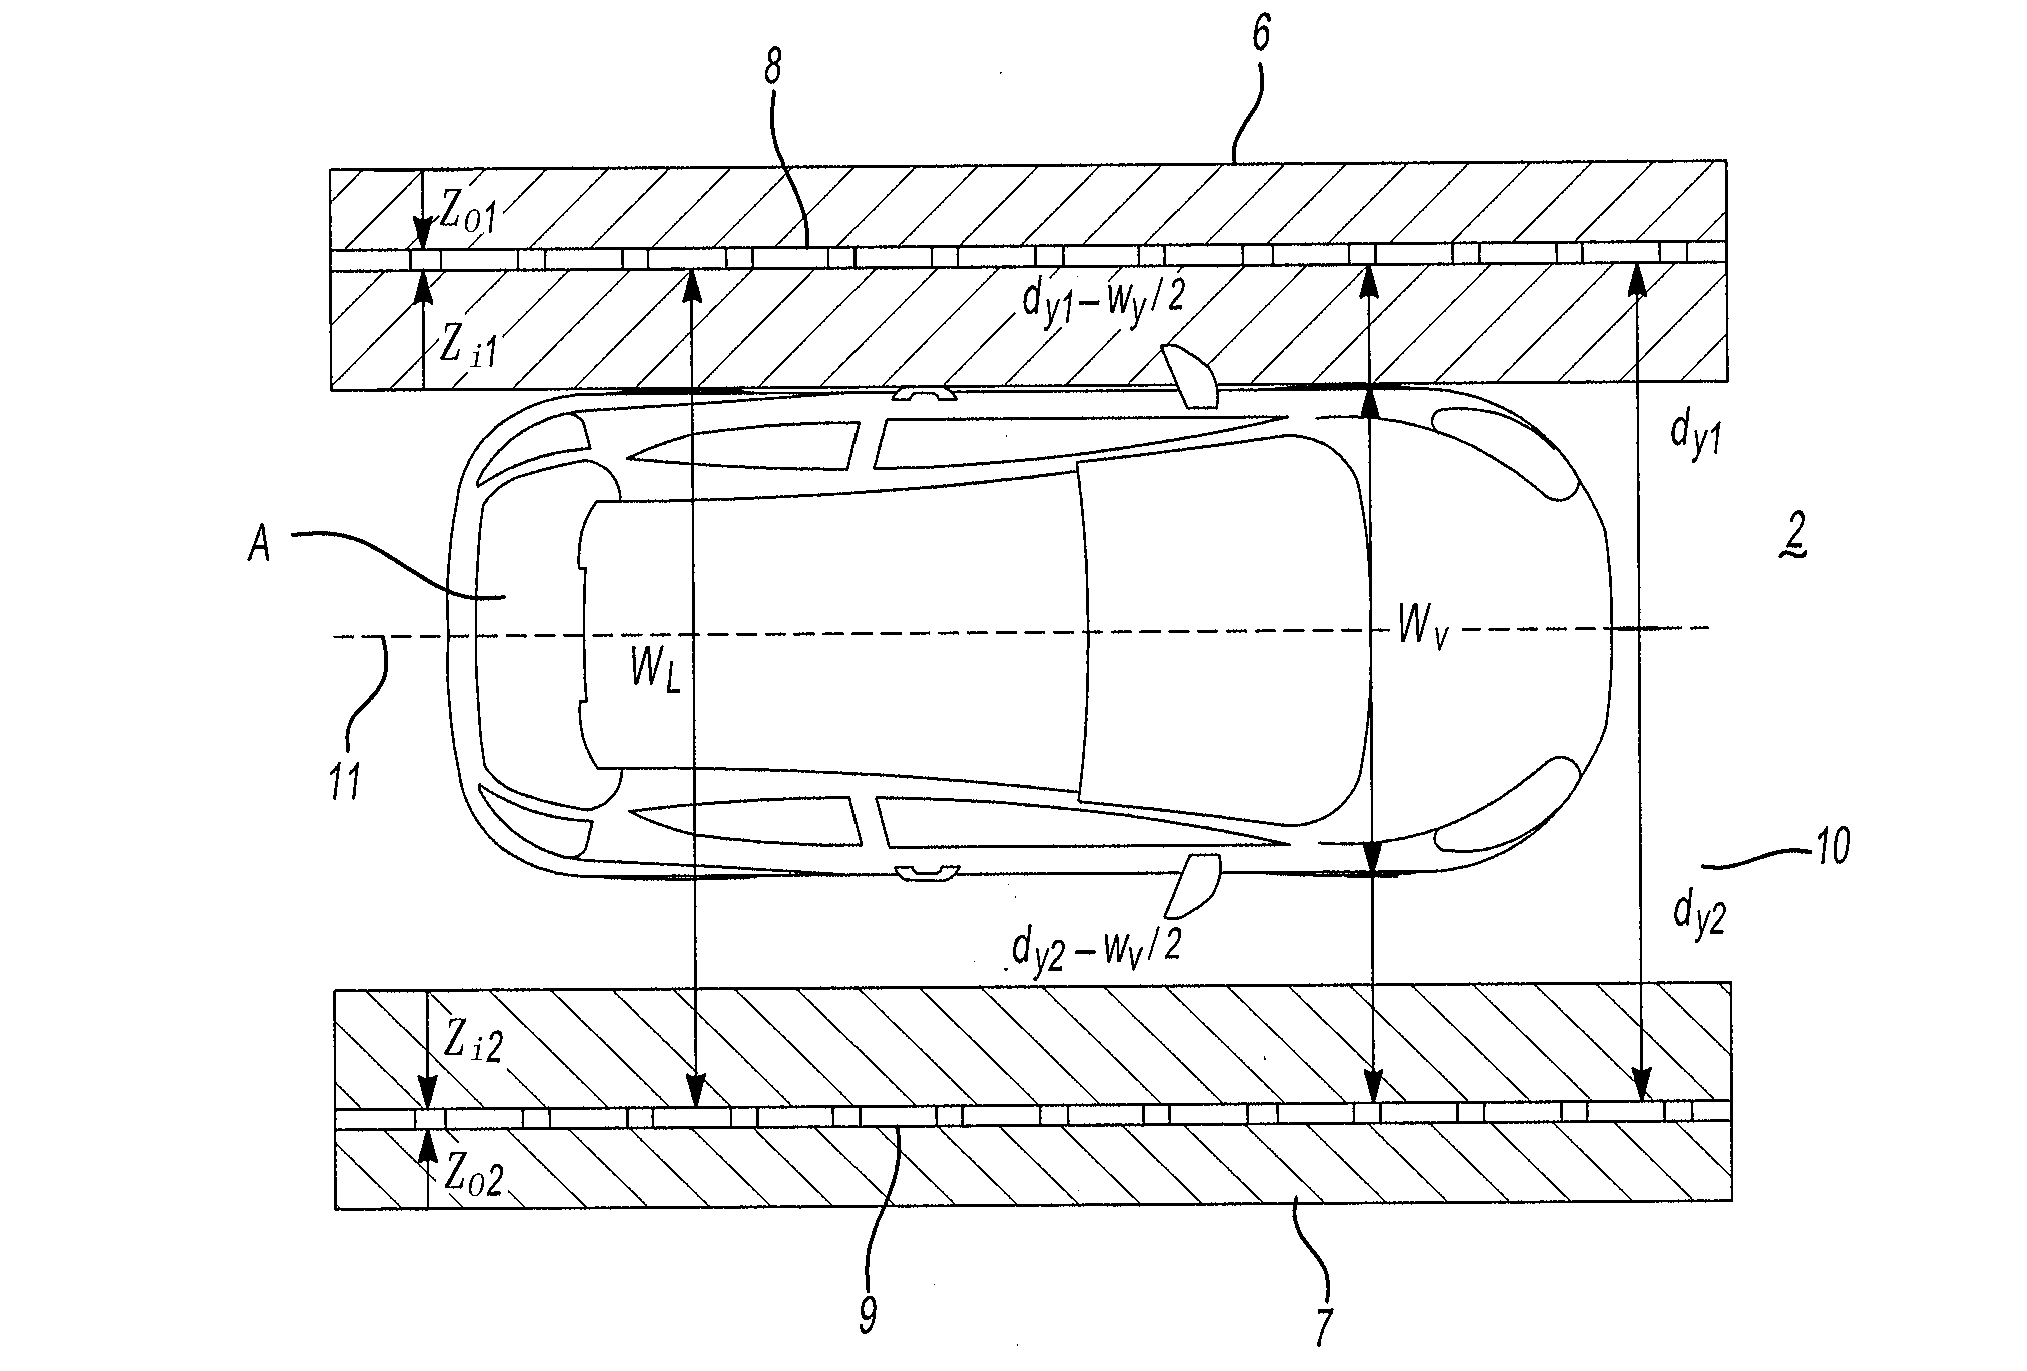 Lane-keeping assistance method for a motor vehicle